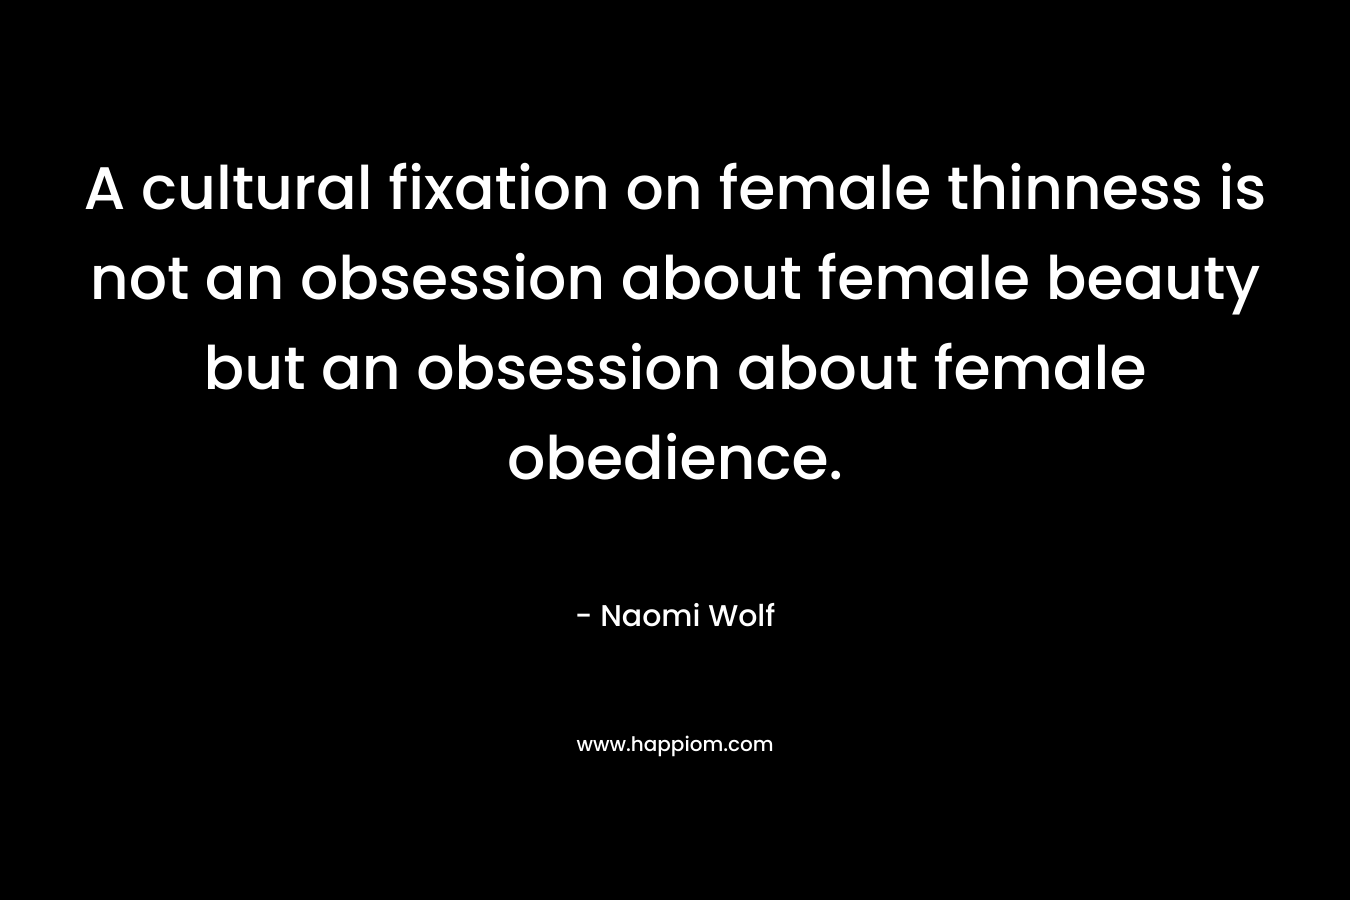 A cultural fixation on female thinness is not an obsession about female beauty but an obsession about female obedience.